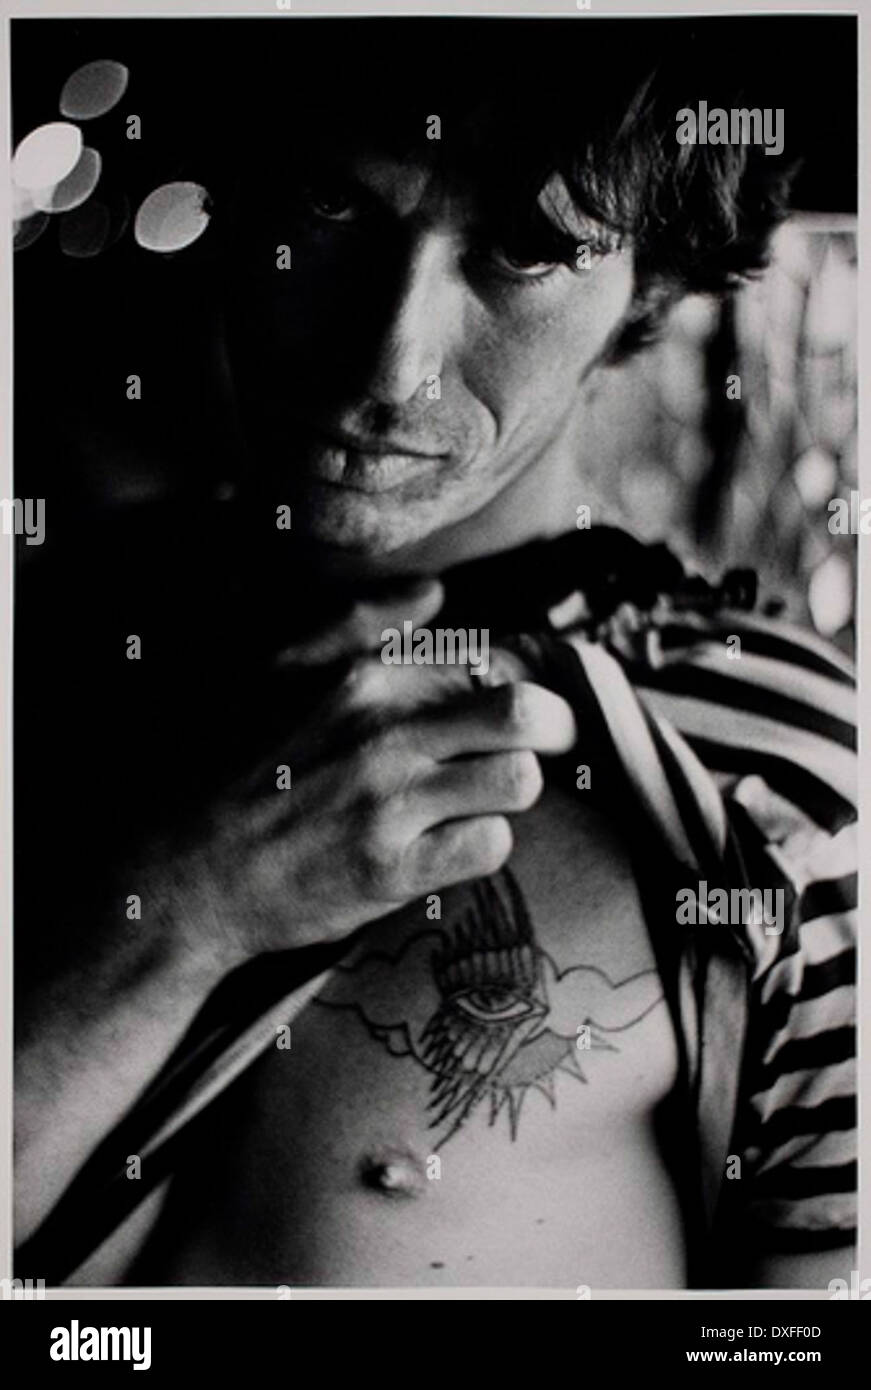 [MAN IN STRIPED SHIRT SHOWING TATTOO] Stock Photo